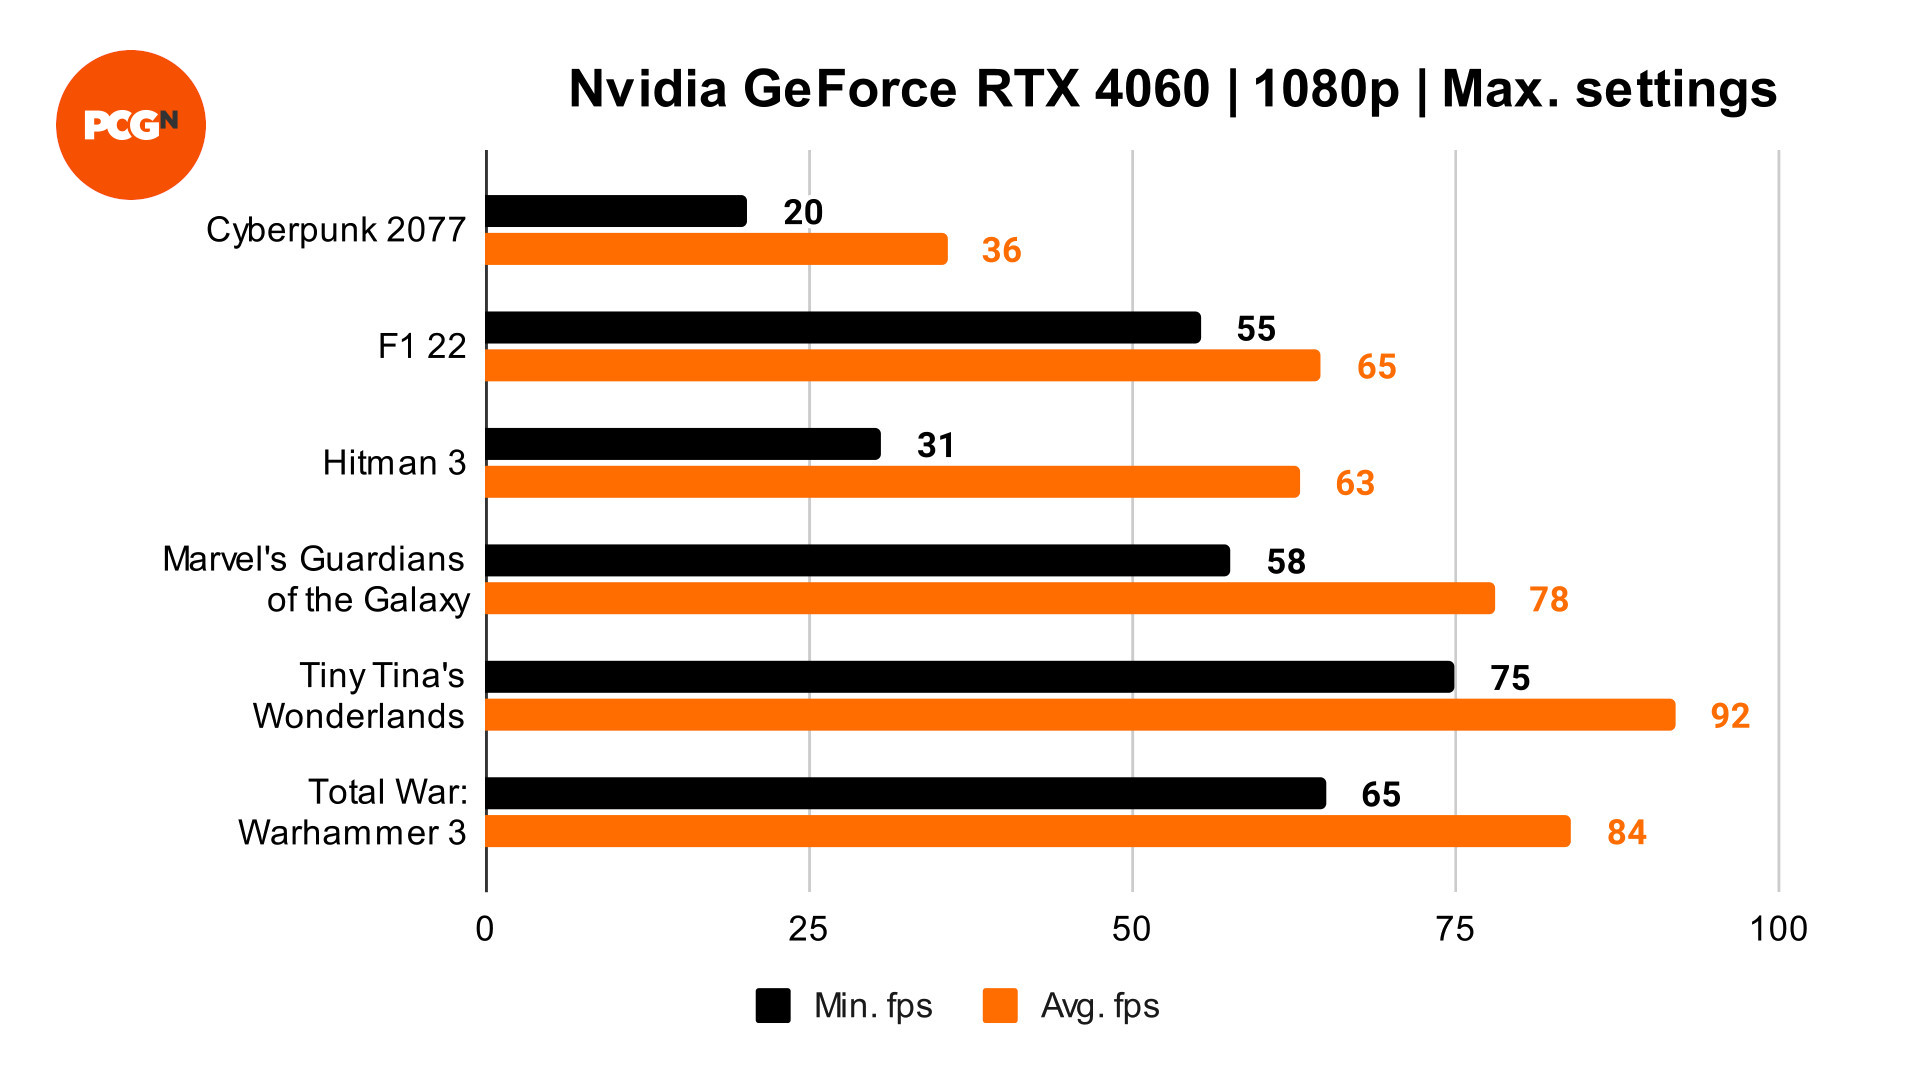 NVIDIA GeForce RTX 4060 Ti Founders Edition Review - Efficiency & Clock  Speeds